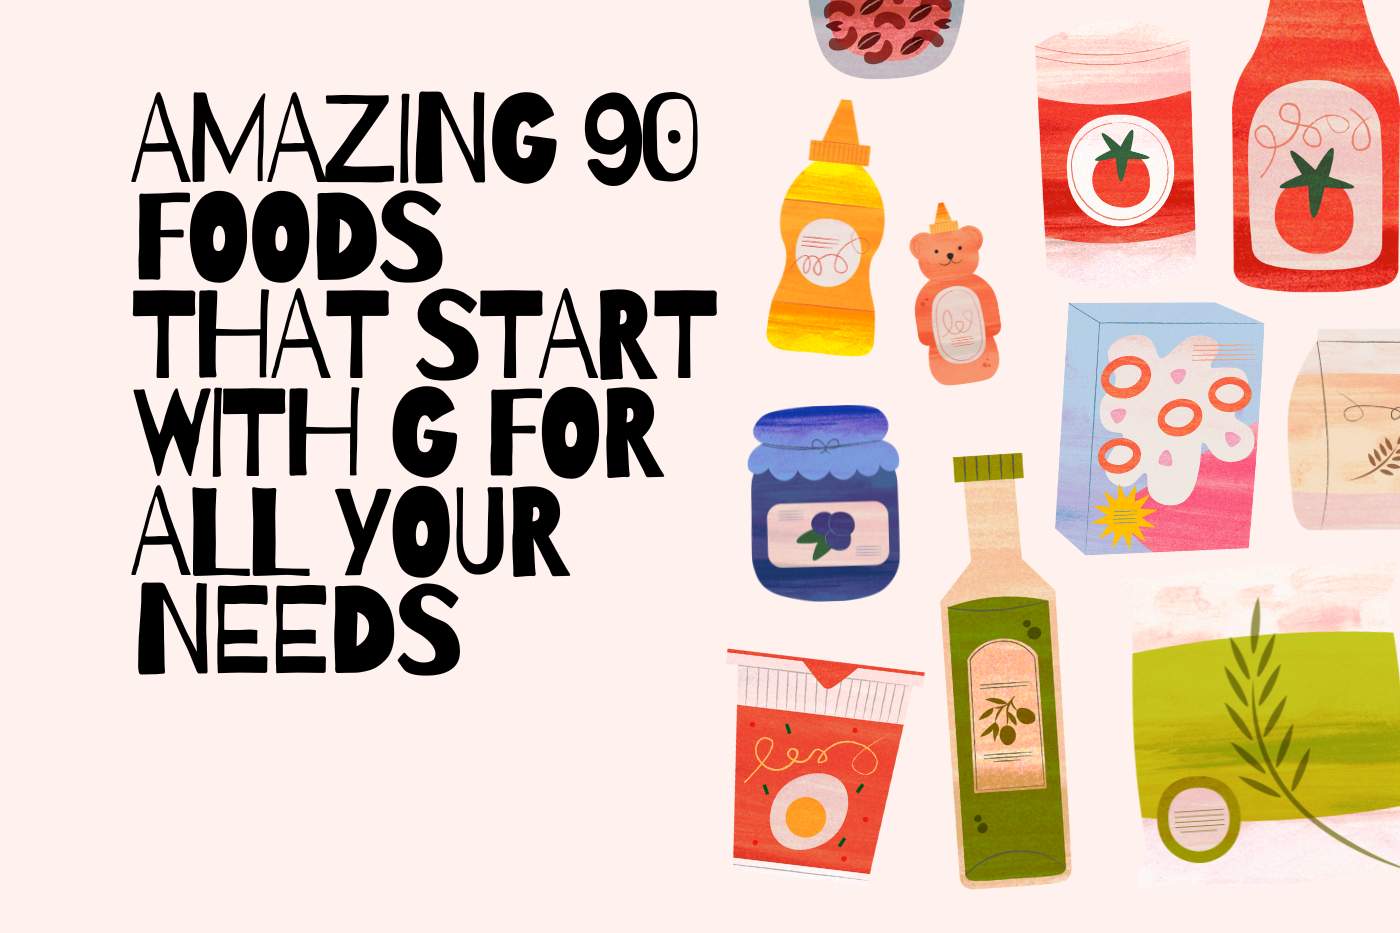 Amazing 90 foods that start with G for all your needs